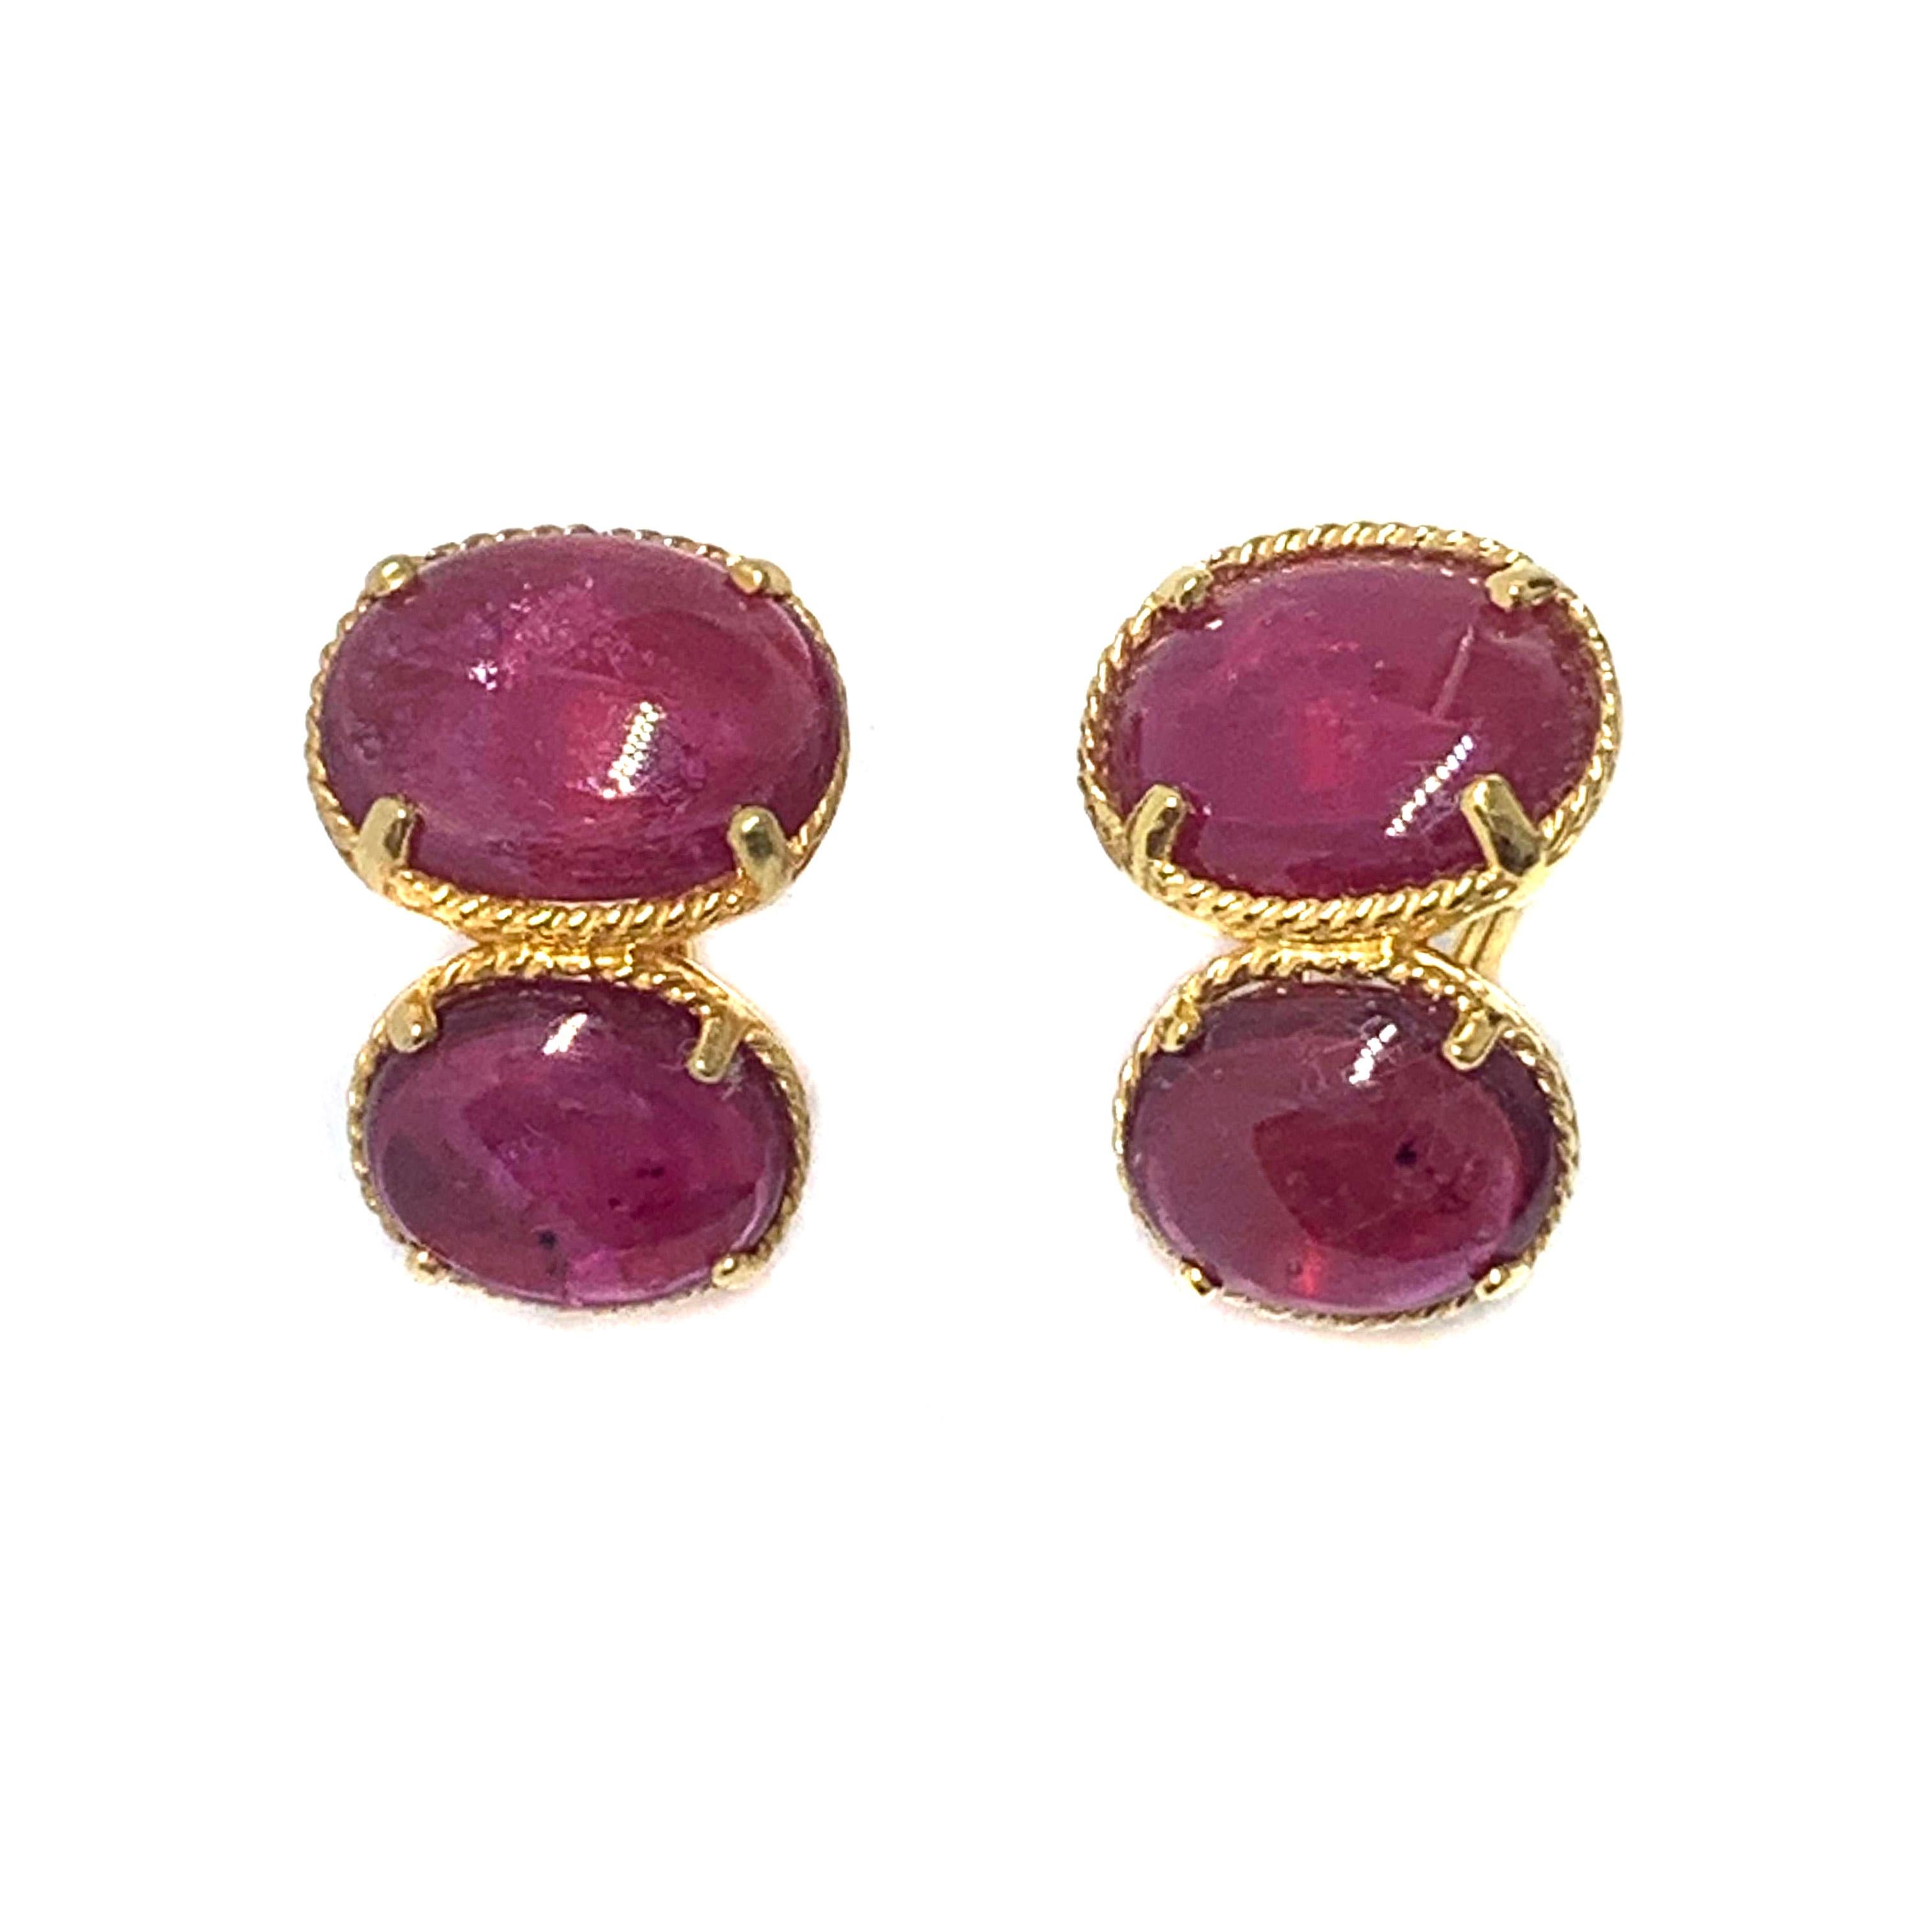 Stunning Bijoux Num Double Genuine Oval Ruby Vermeil Earrings. 
The earrings feature 4 beautiful pink-ish oval cabochon-cut ruby (18 carat total weight), handset in 18k gold vermeil over sterling silver.  Straight post back with omega clip backing.